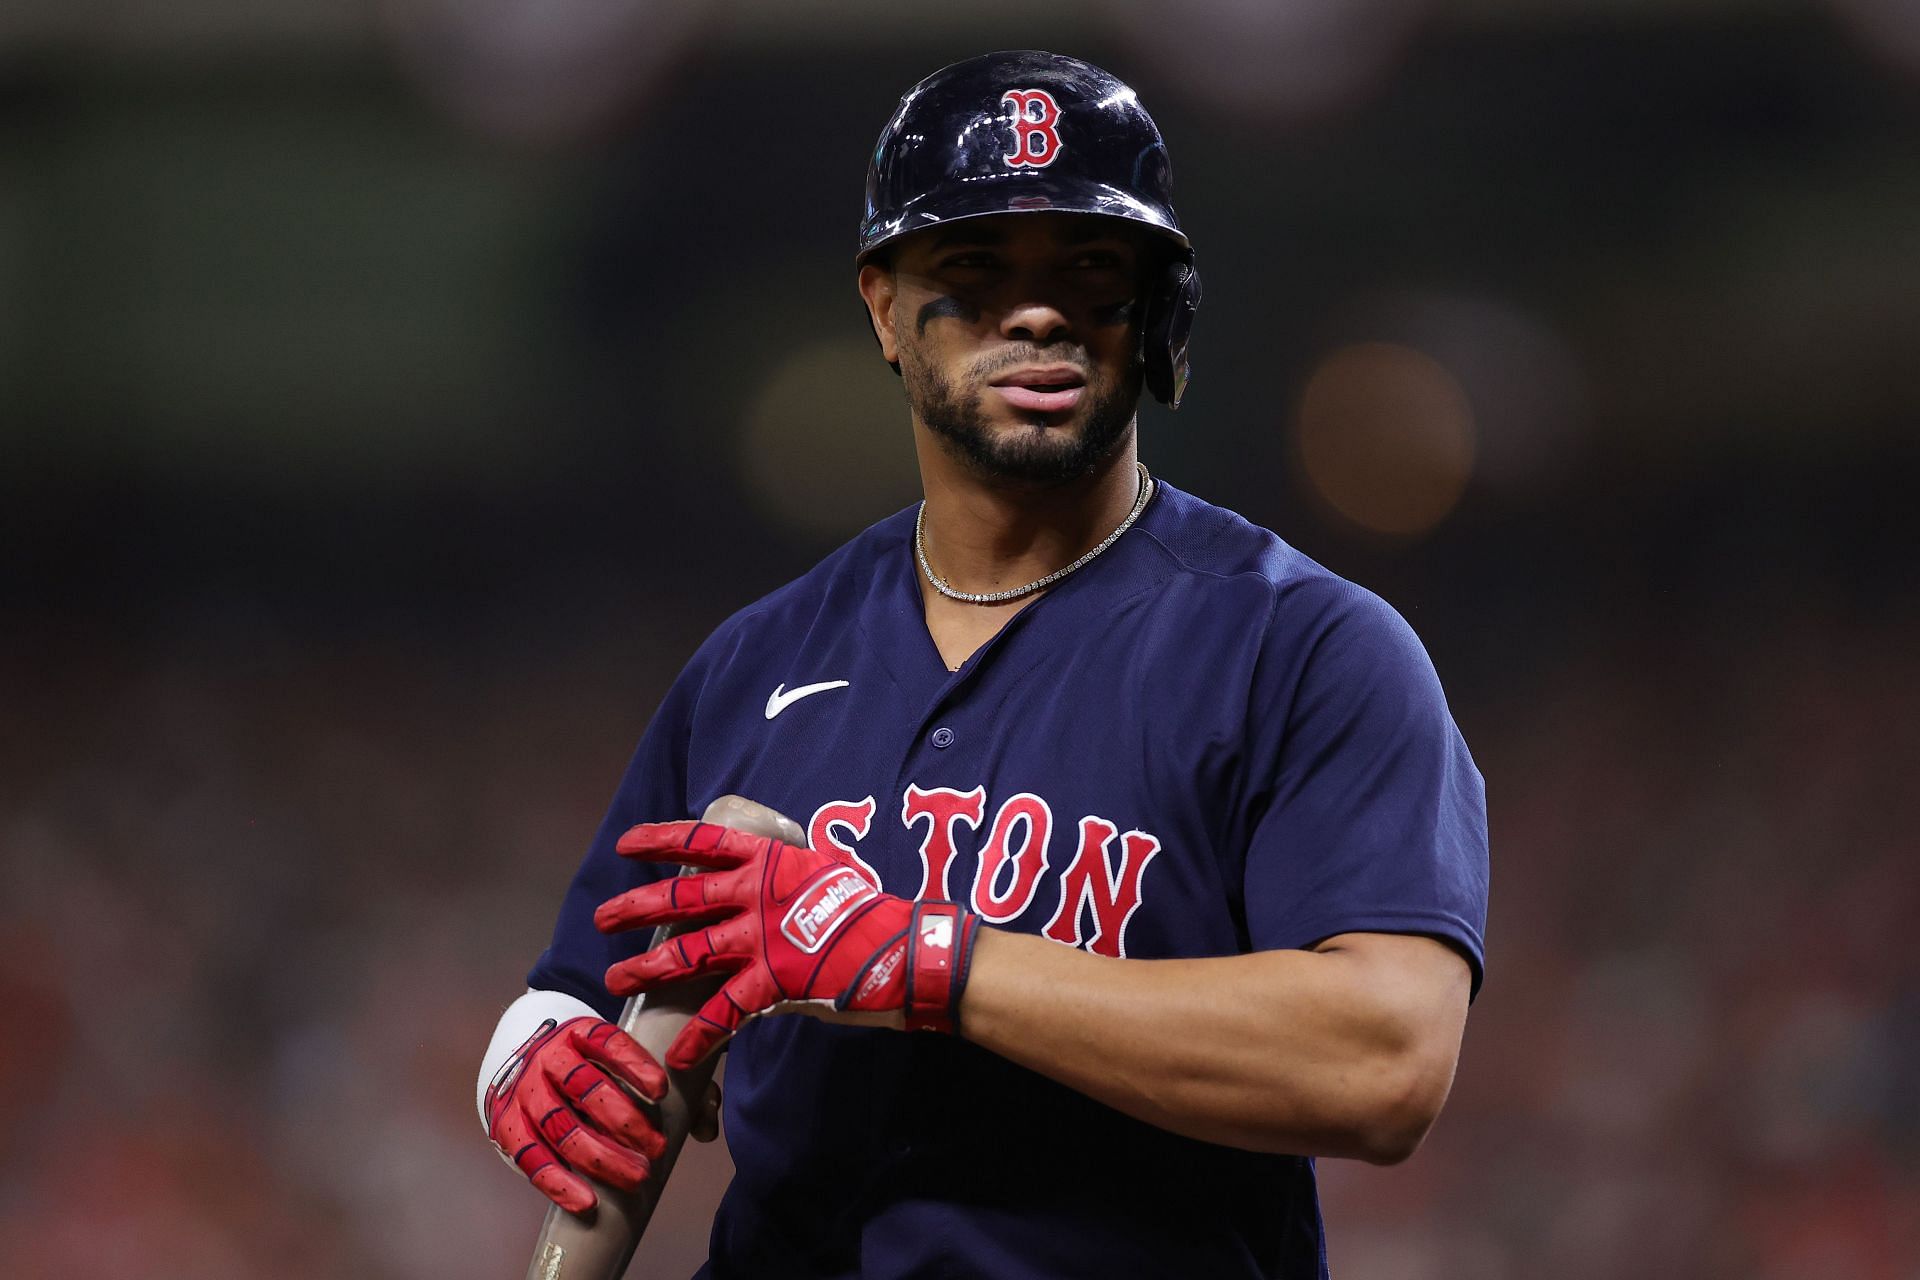 Red Sox' Xander Bogaerts on Jerry Remy's passing: 'He will be